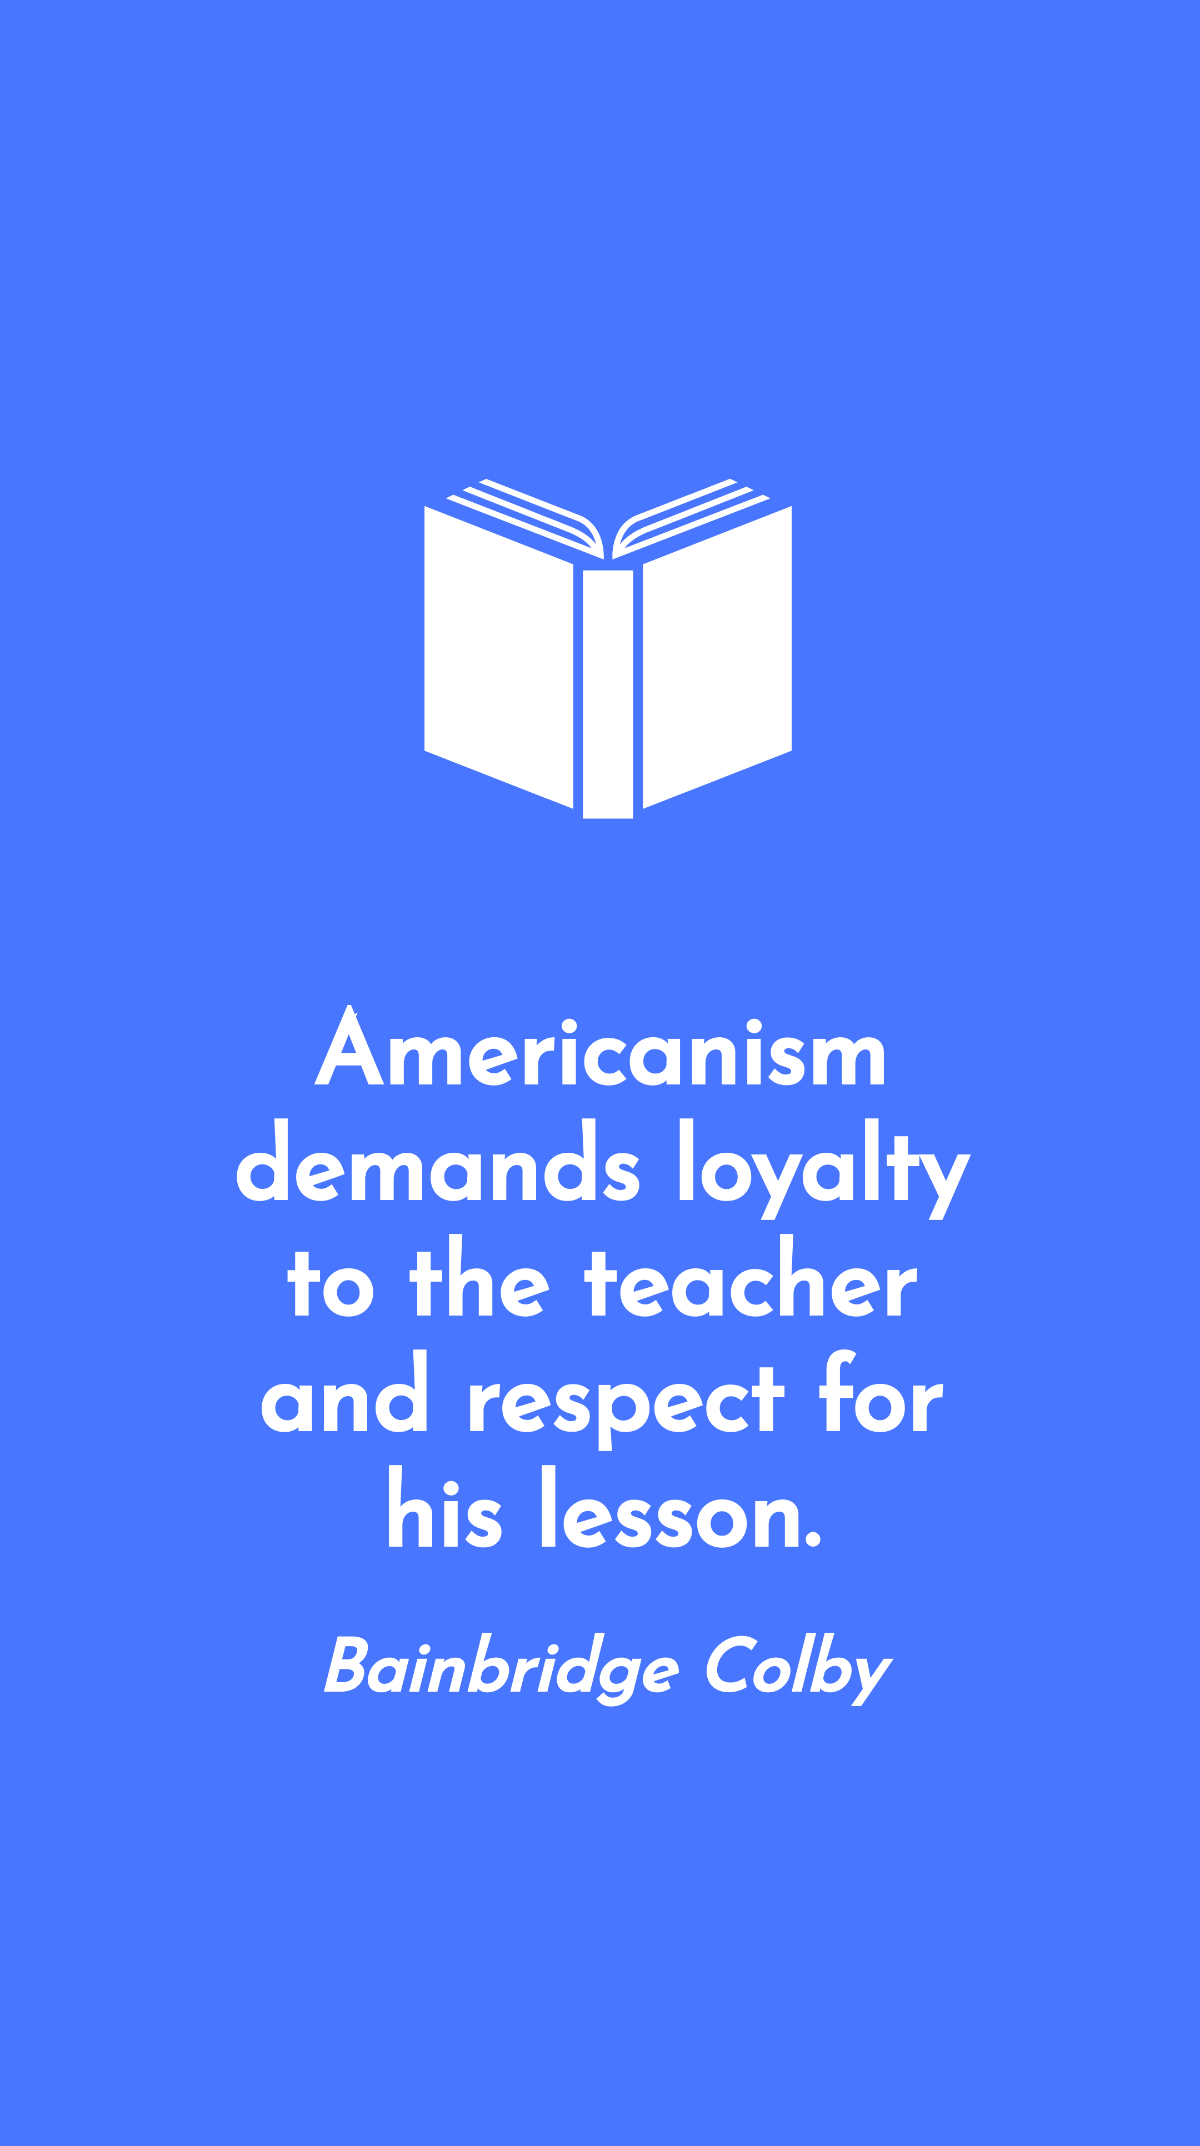 Bainbridge Colby - Americanism demands loyalty to the teacher and respect for his lesson. Template